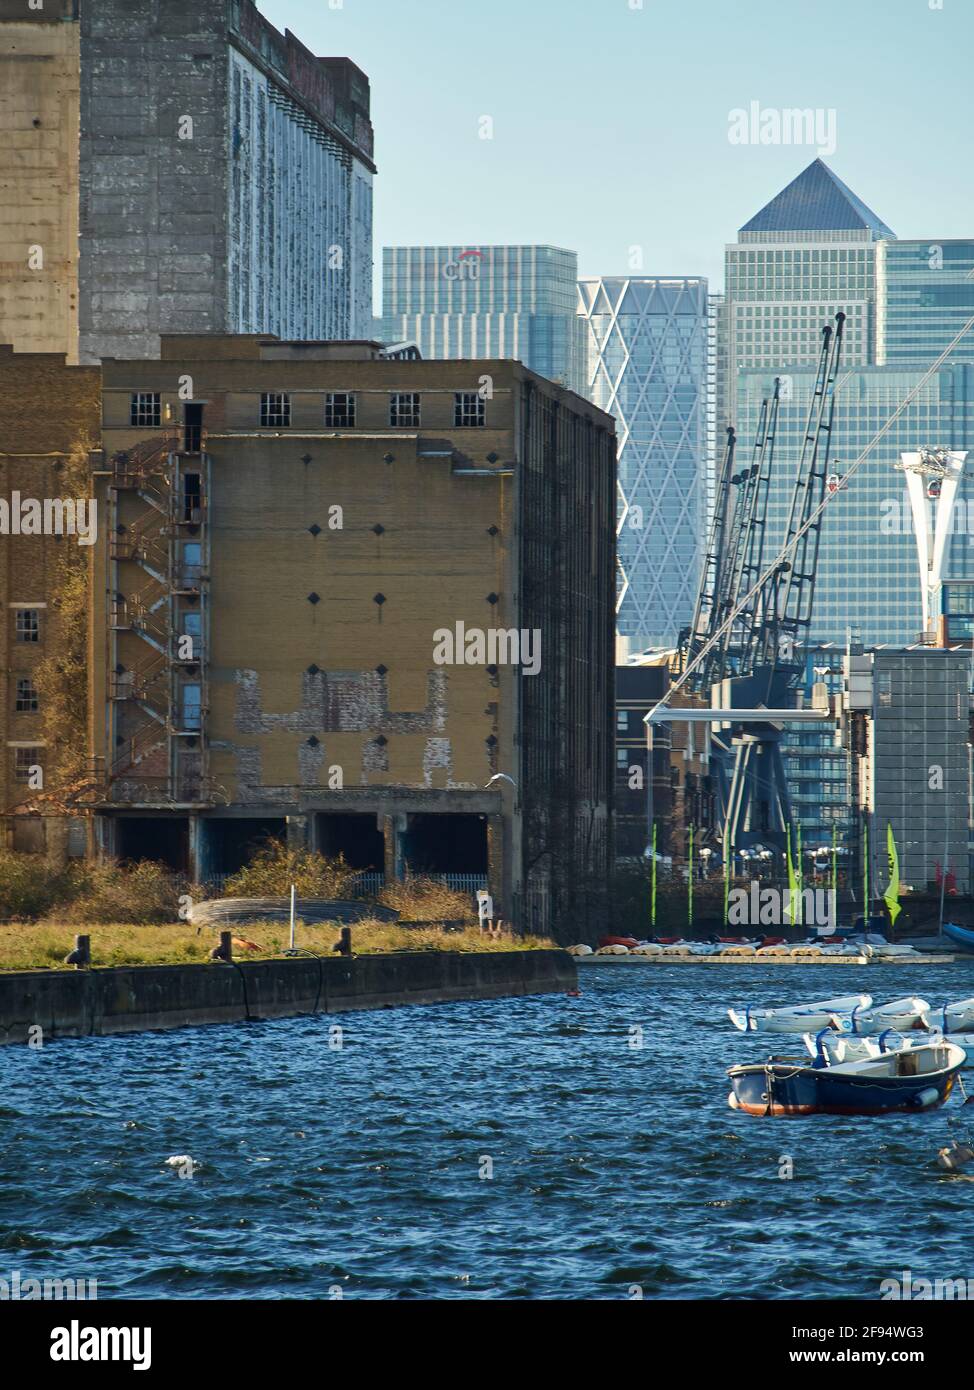 London UK, Dec 2019 - Old and new together, the derelict hulk of the old Millennium Mills warehouses and the sleek, modern towers of Canary Wharf. Stock Photo